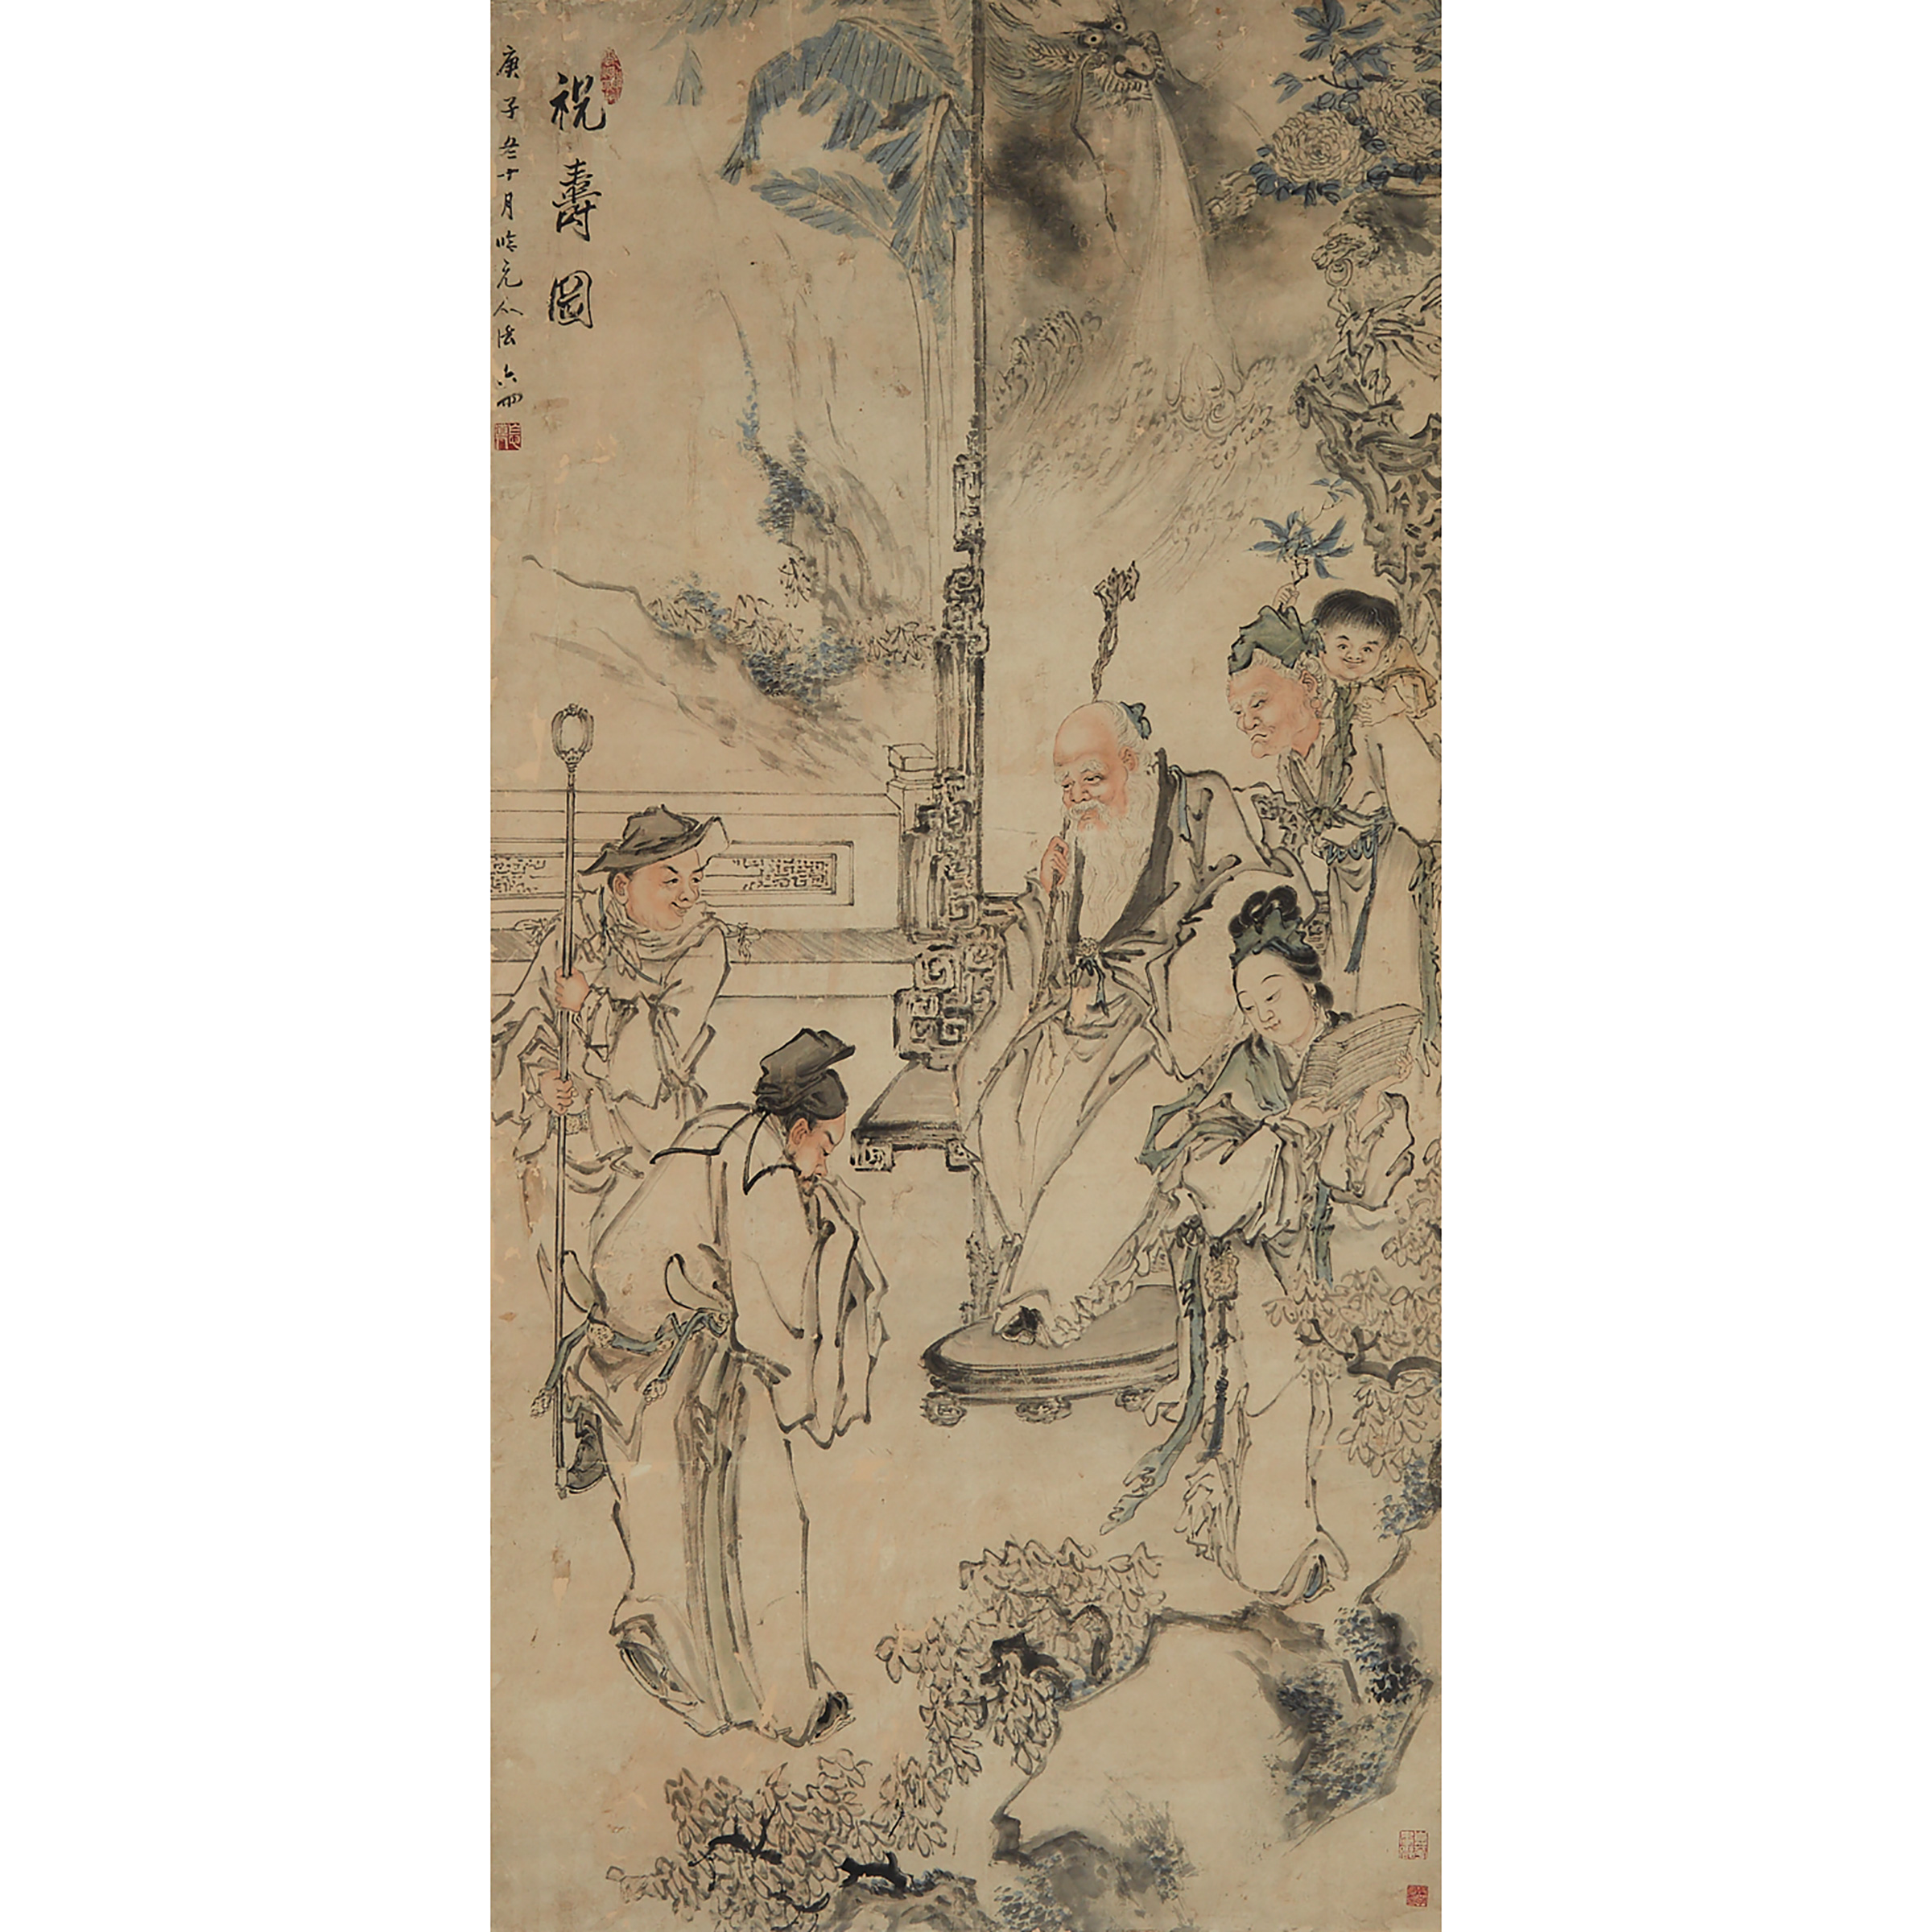 Attributed to Su Liupeng (Late Qing Dynasty), Longevity Celebration